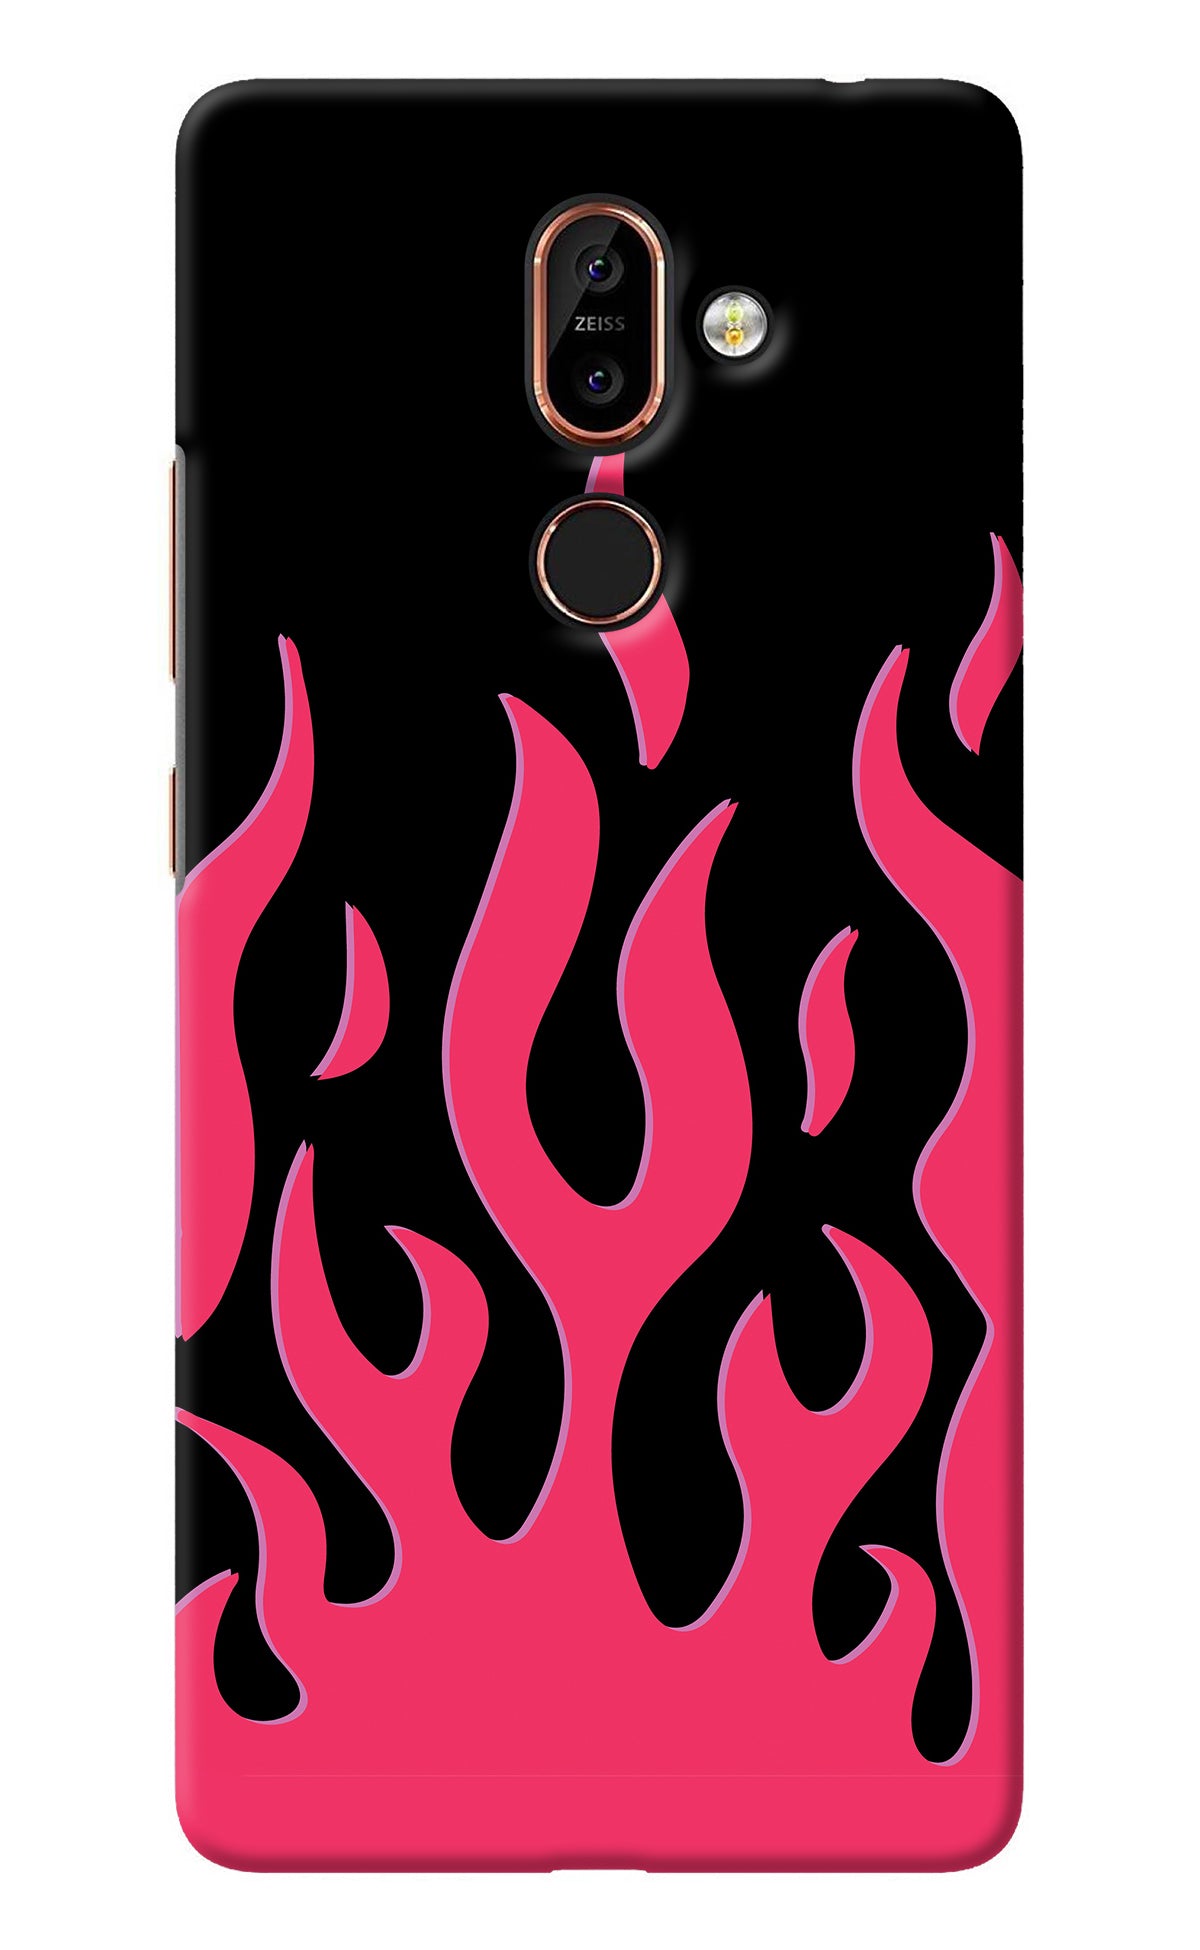 Fire Flames Nokia 7 Plus Back Cover